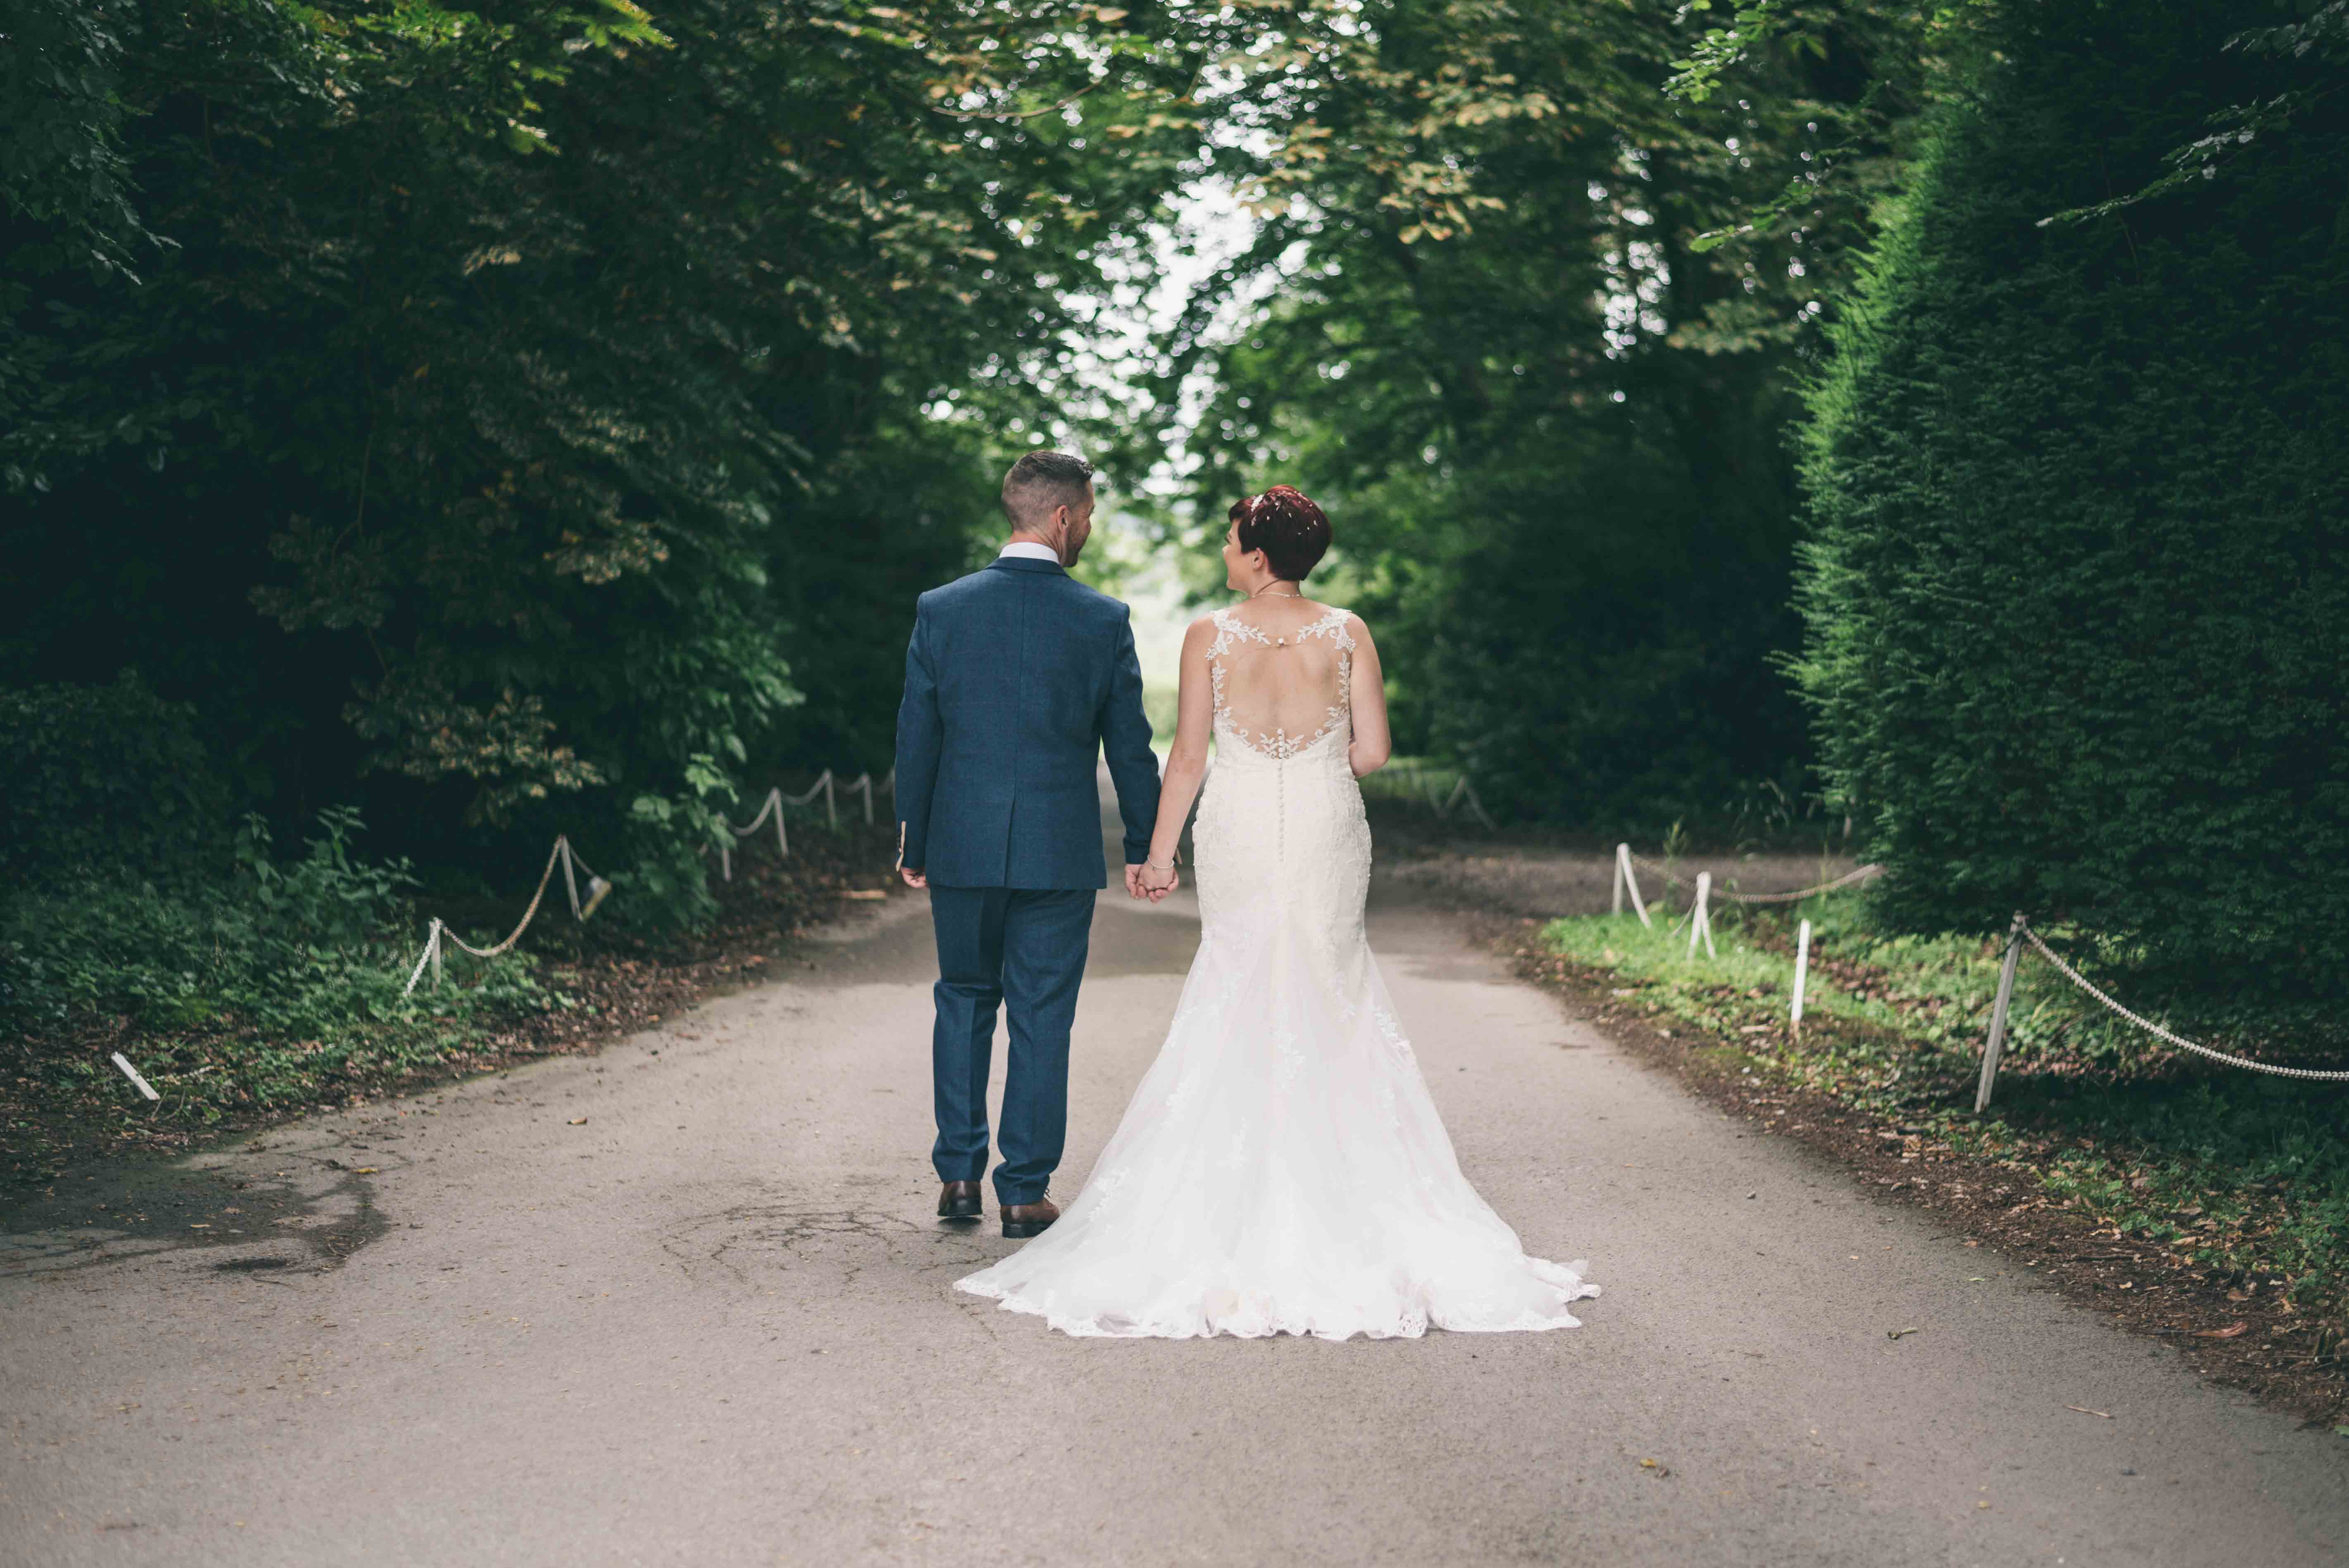 Bride & Groom walk up driveway and chat during wedding photography at Highfield Hall